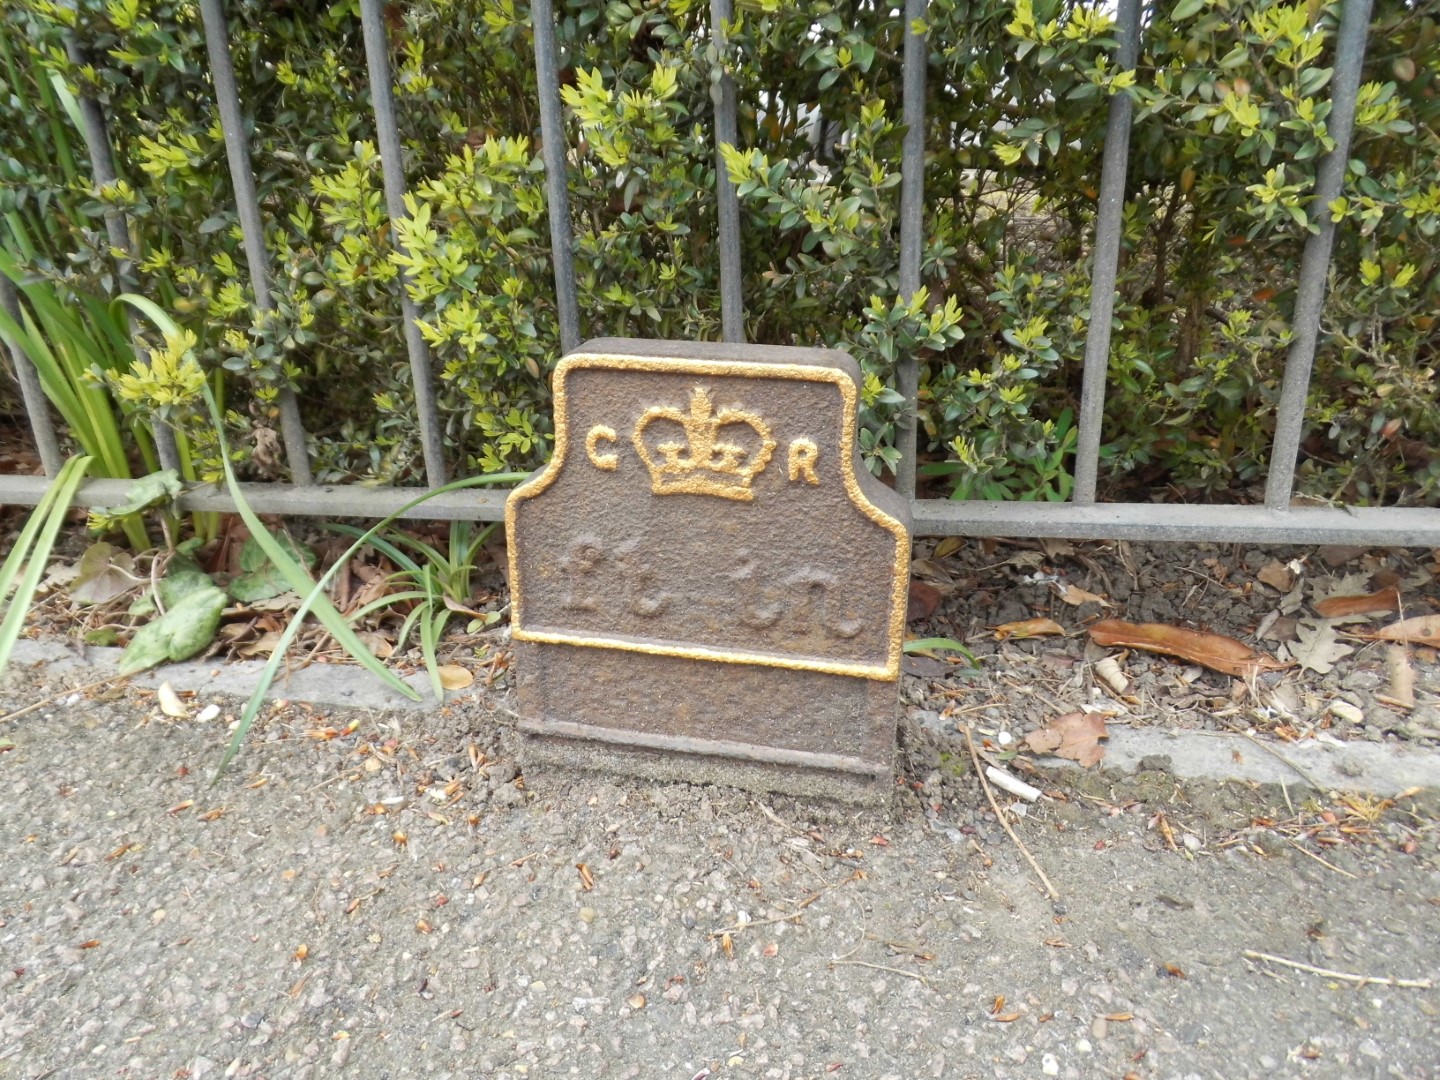 Telegraph cable marker post at 55 Langley Road, Watford by Derek Pattenson 